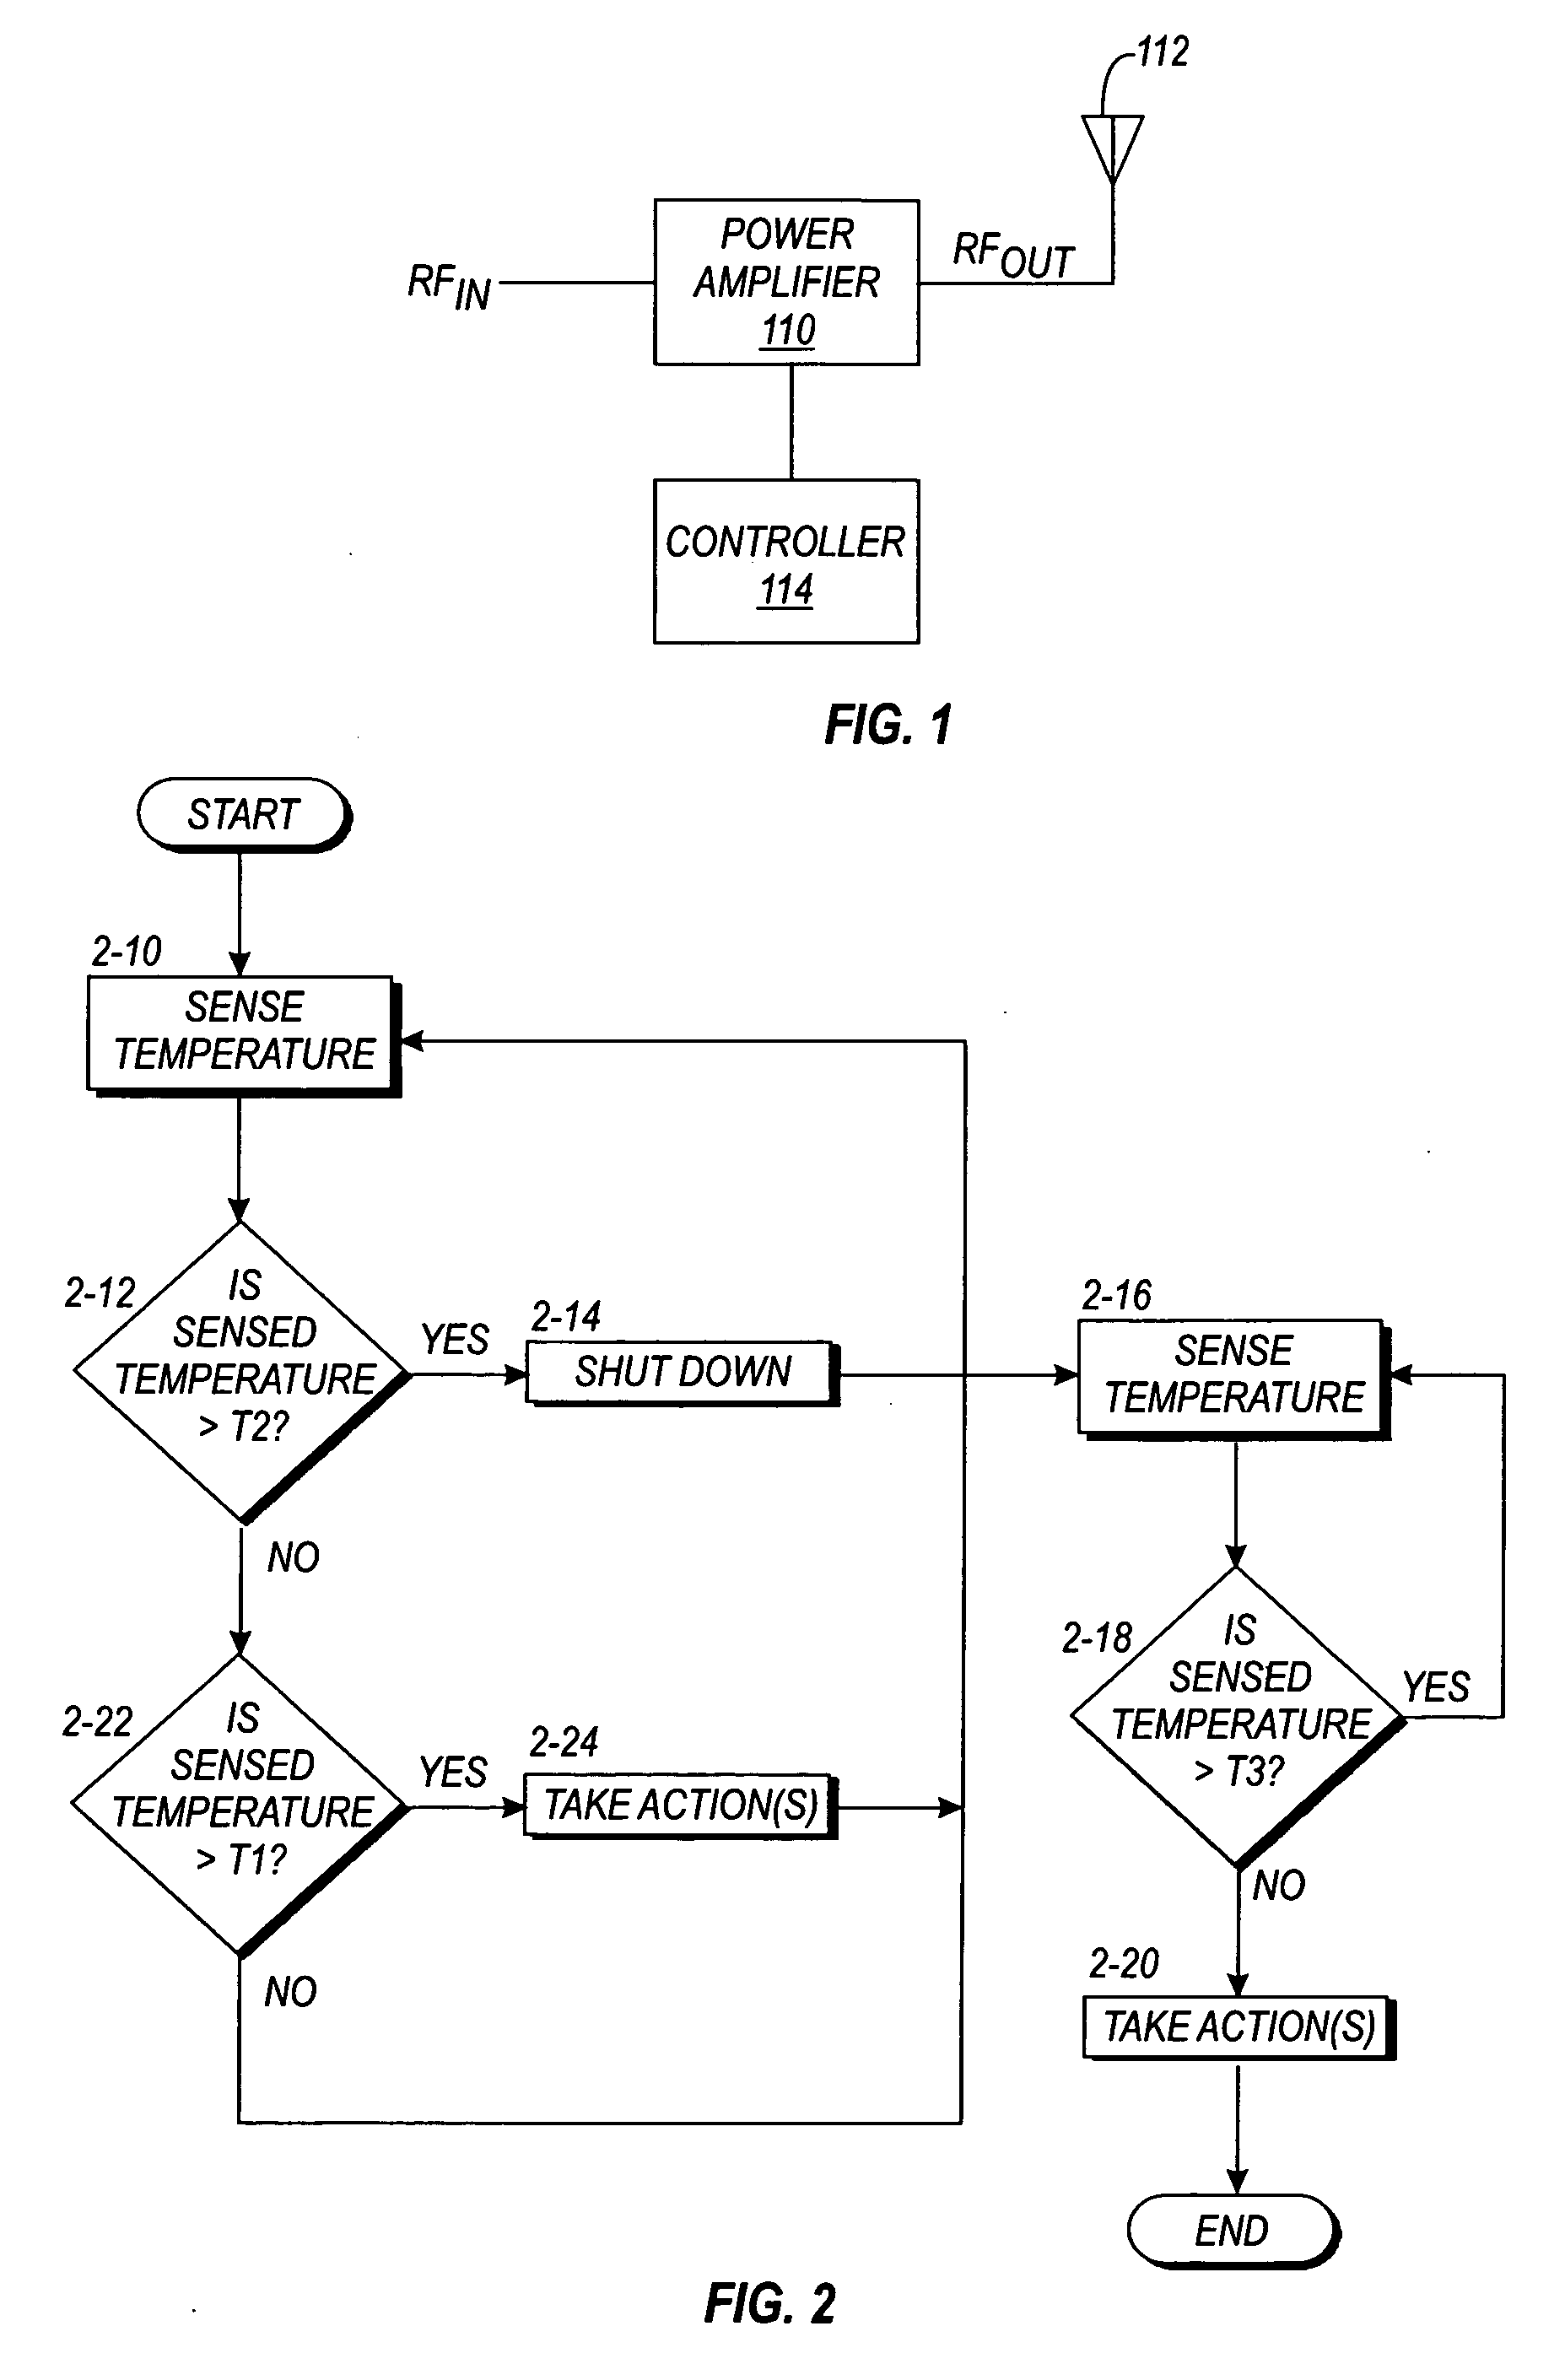 Method of protecting power amplifiers